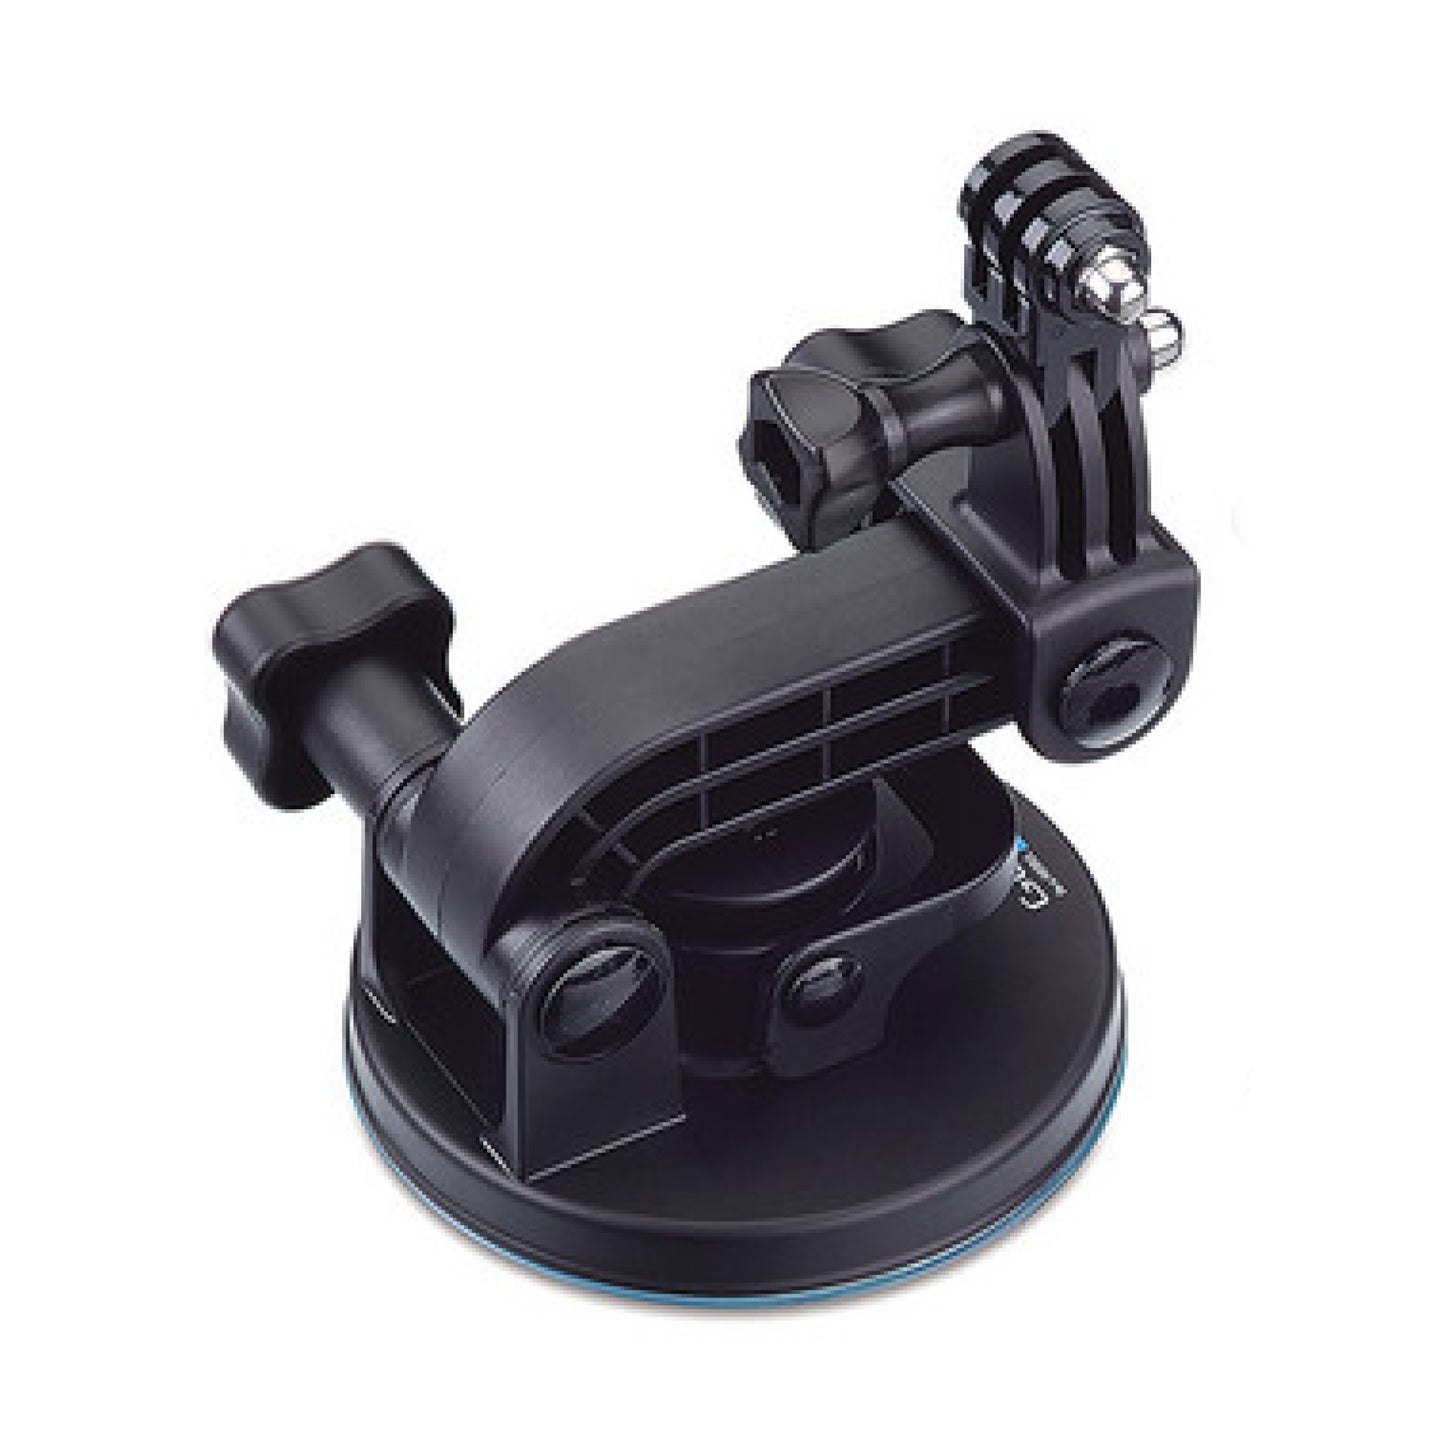 GoPro Suction cup accessories for hire